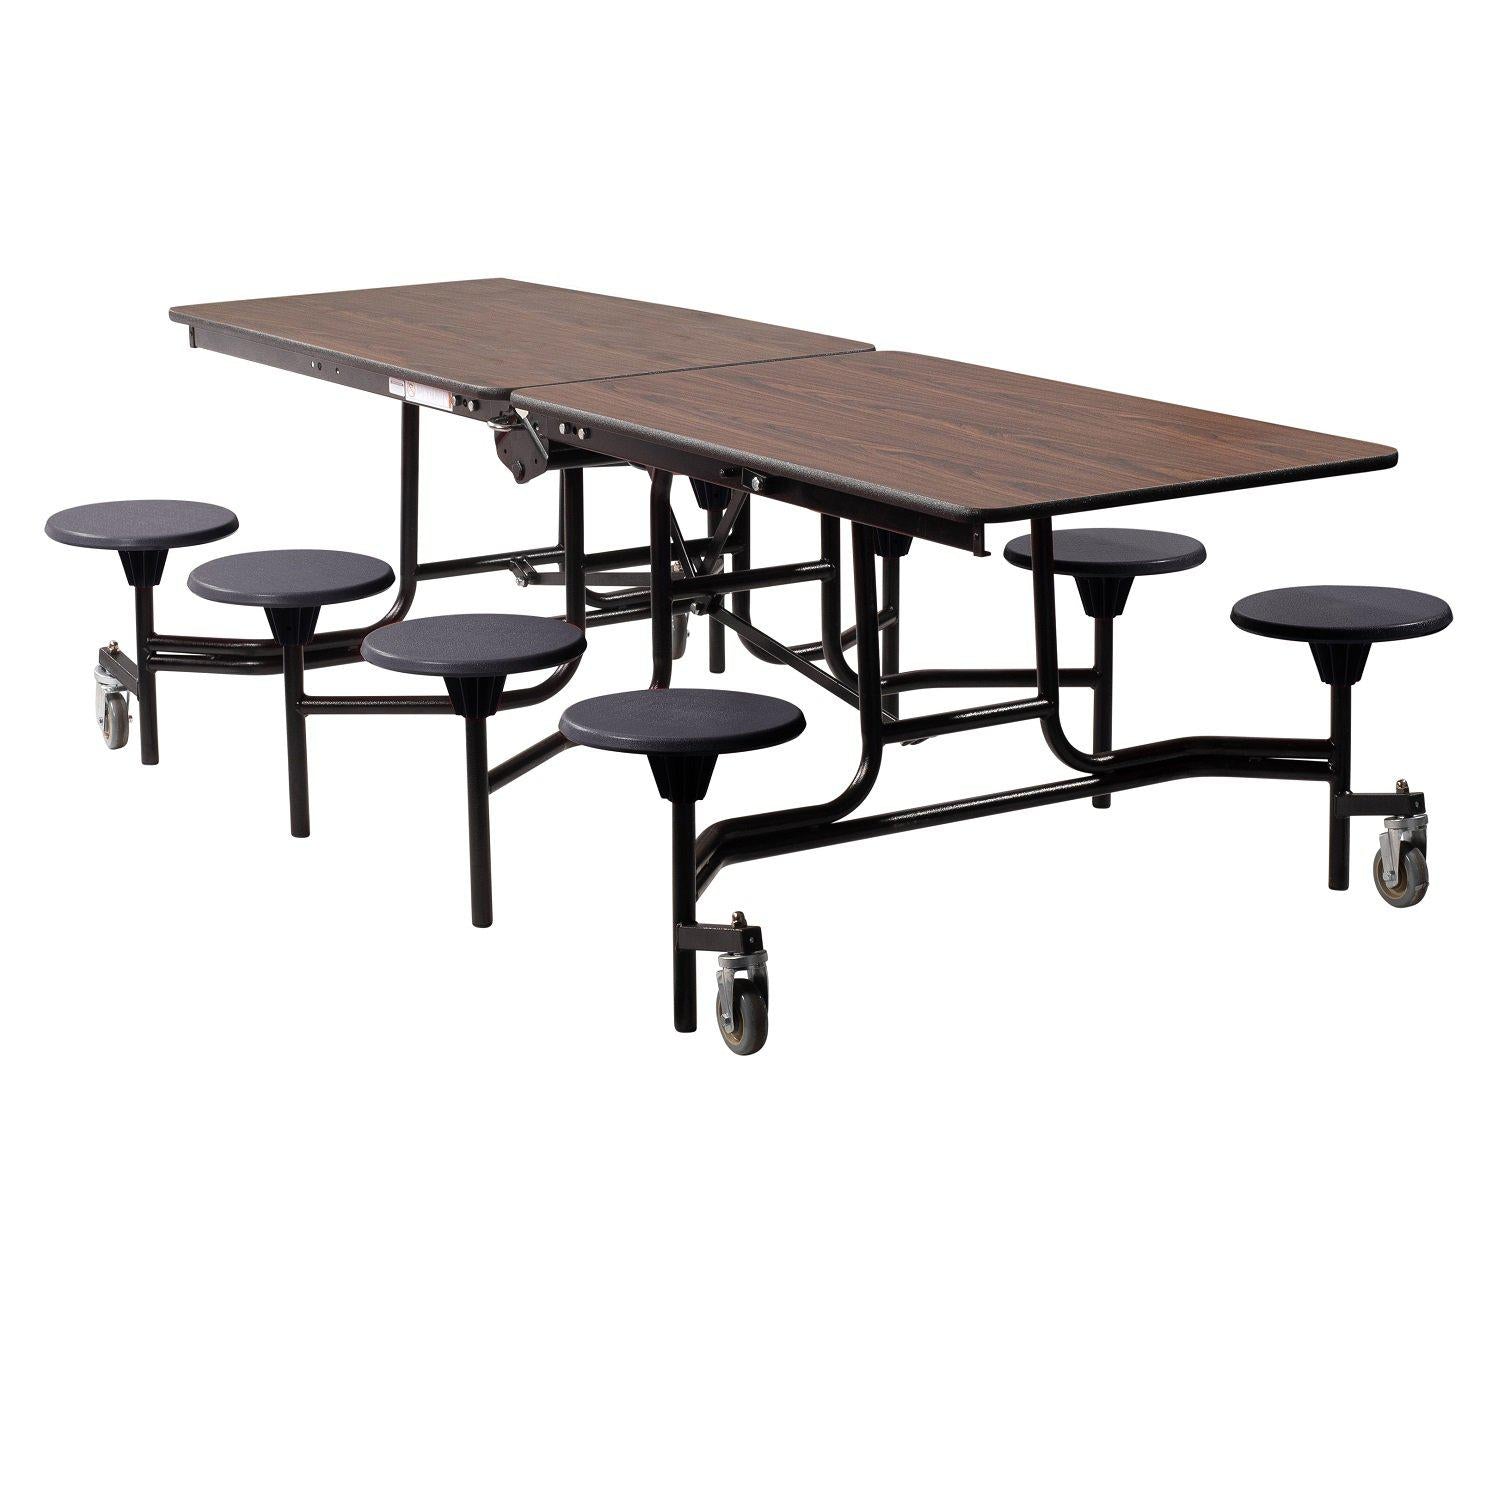 Mobile Cafeteria Table with 8 Stools, 8'L Rectangular, MDF Core, Black ProtectEdge, Textured Black Frame